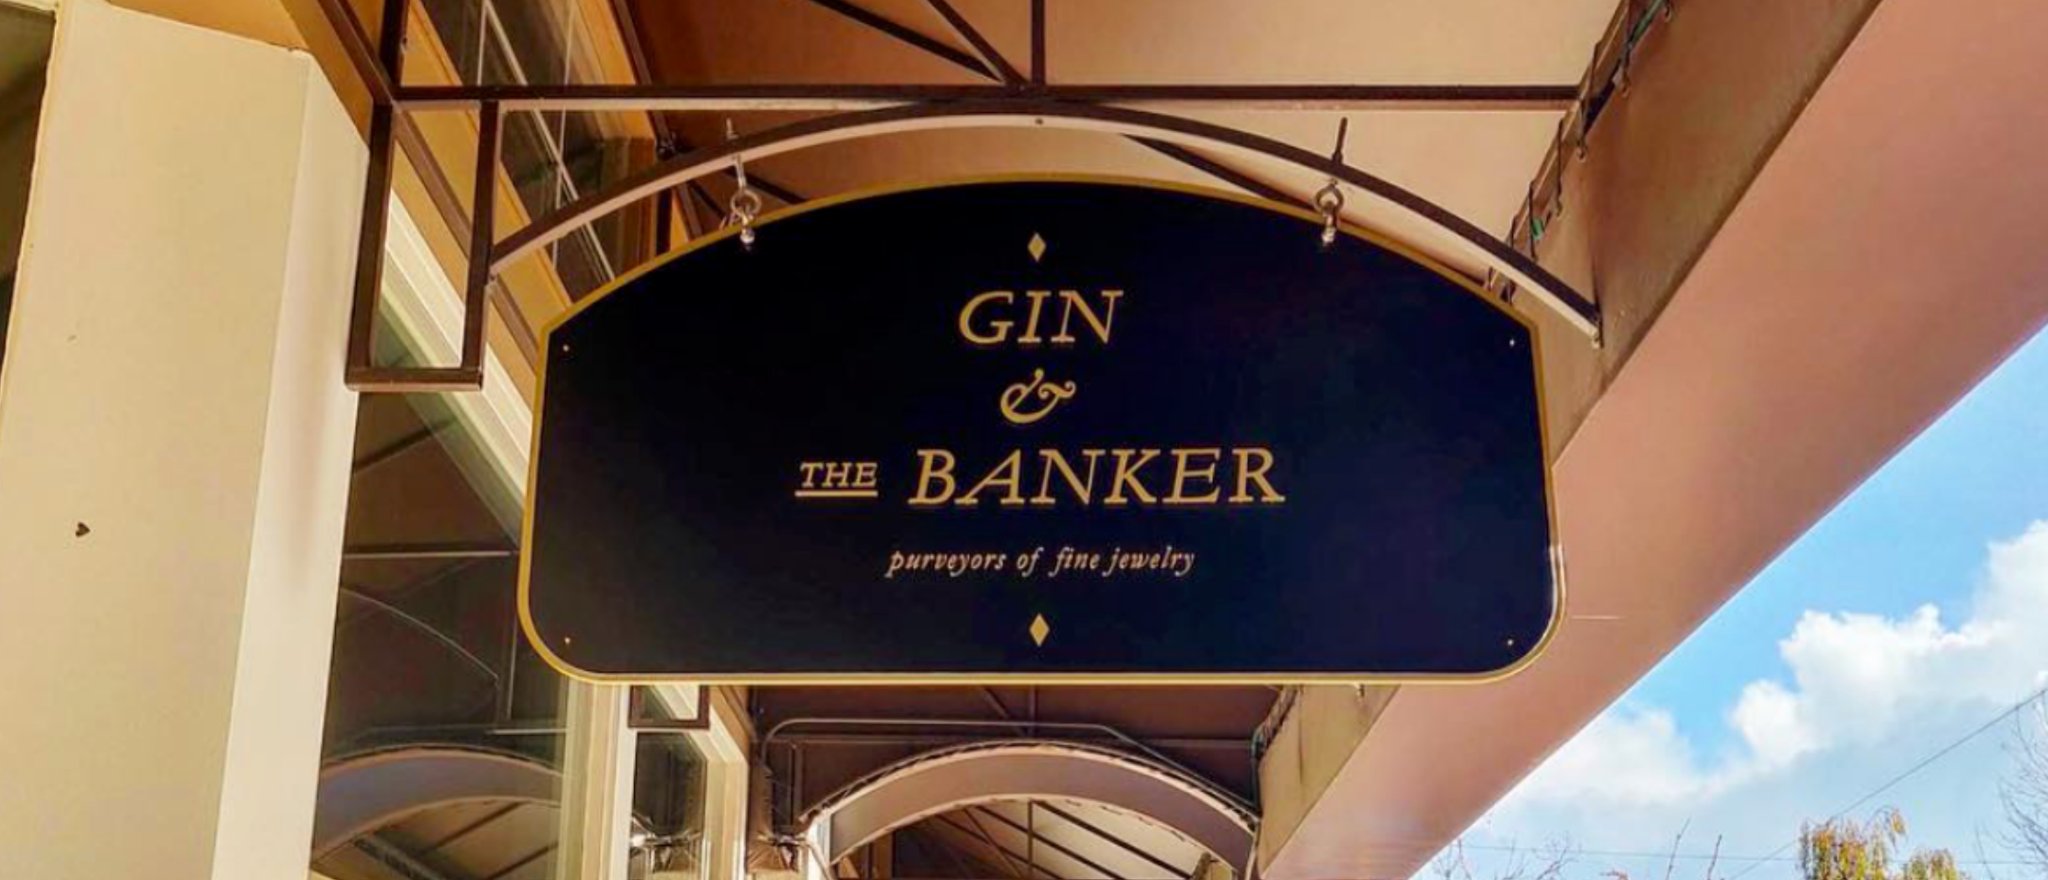 Gin and the Banker